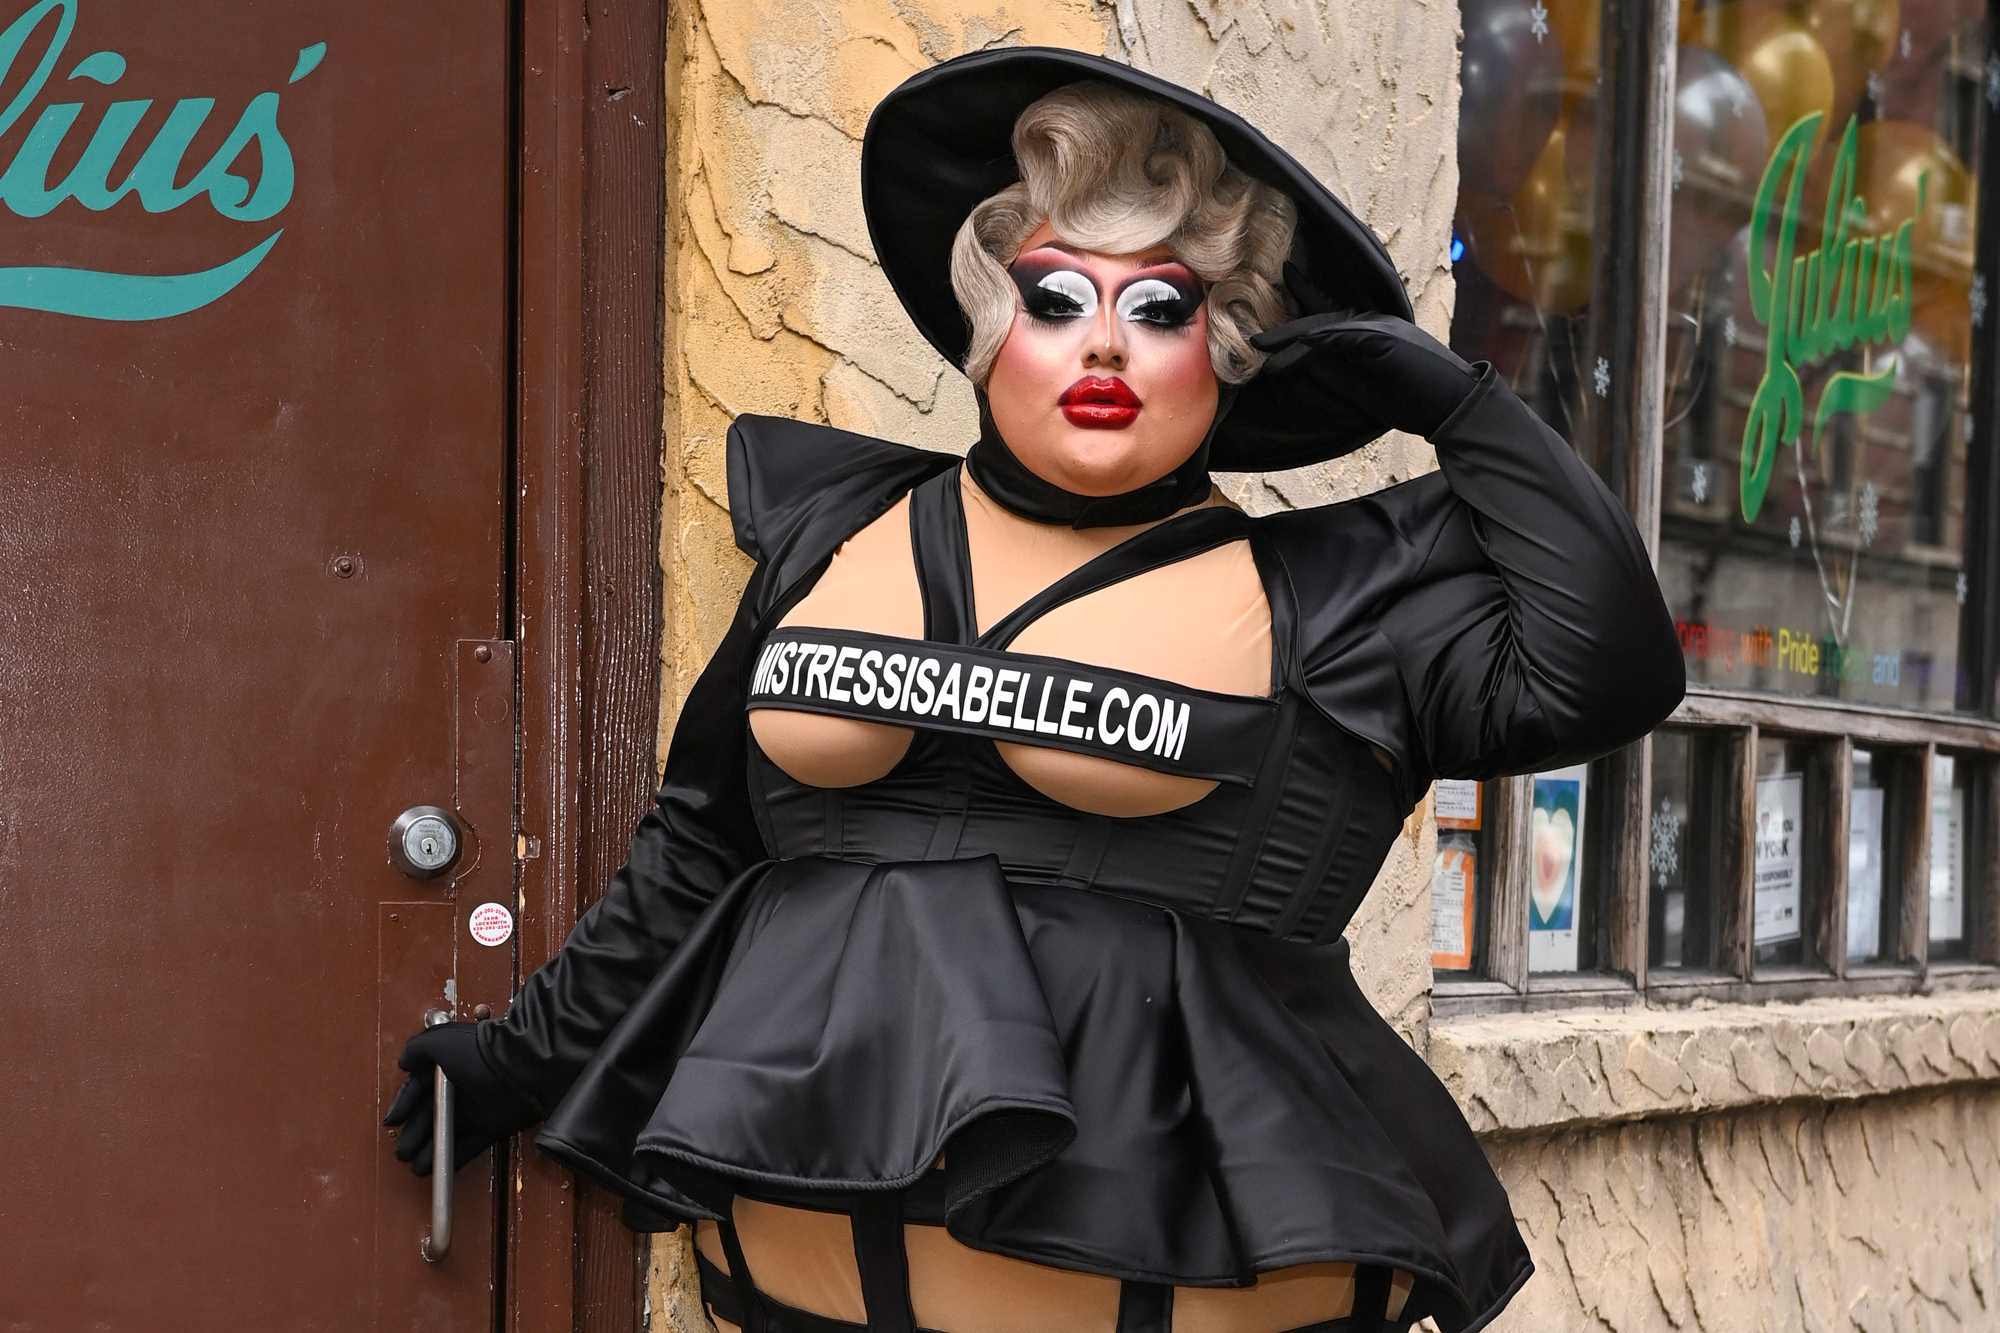 'RuPaul's Drag Race' Season 15 queen Mistress Isabelle Brooks posing in a black costume standing in front of Julius' Bar 